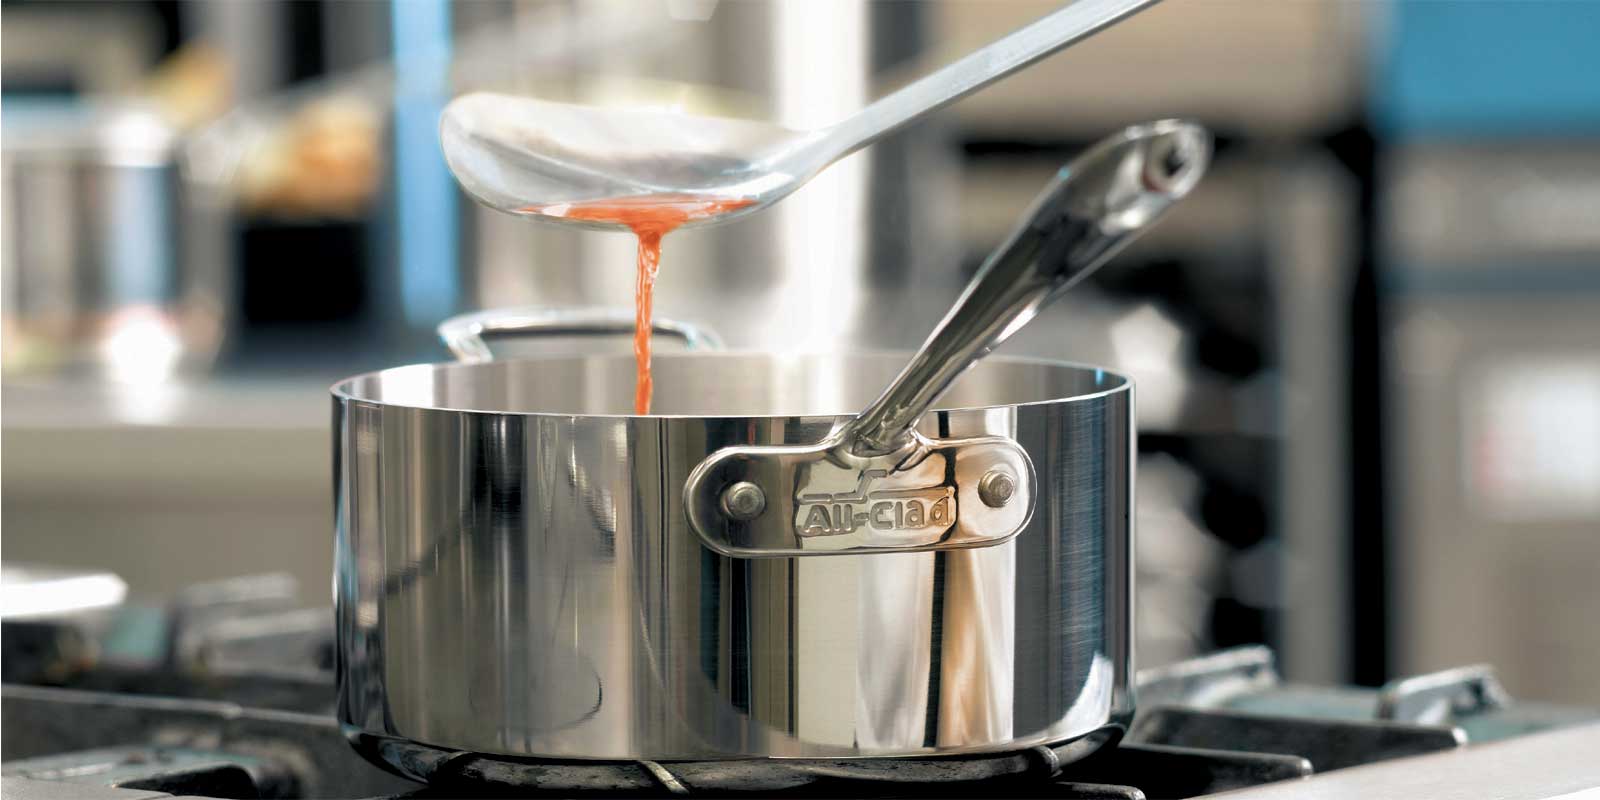 All-Clad Pots and Pans - Stainless®